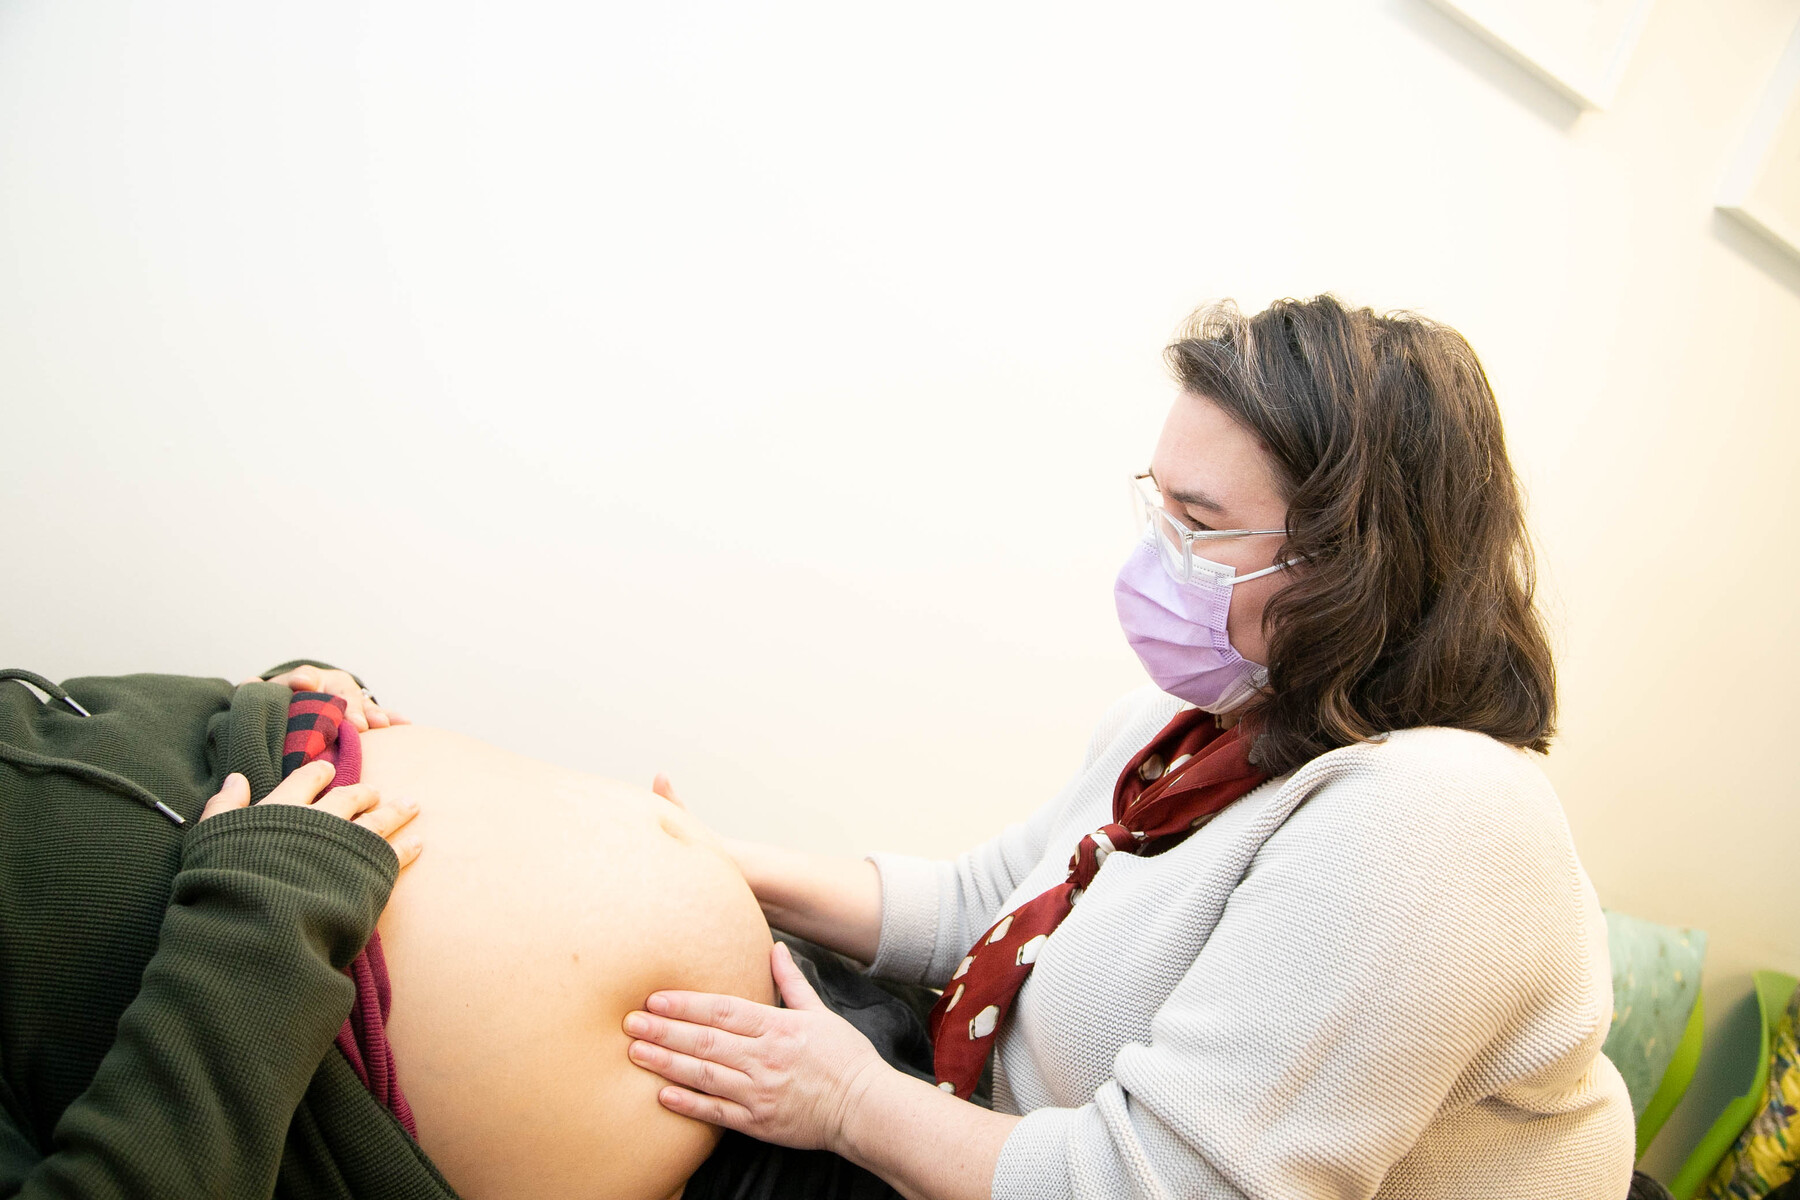 Cheryllee in an examination room. She has her hands on a pregnant woman's stomach, conducting an exam.